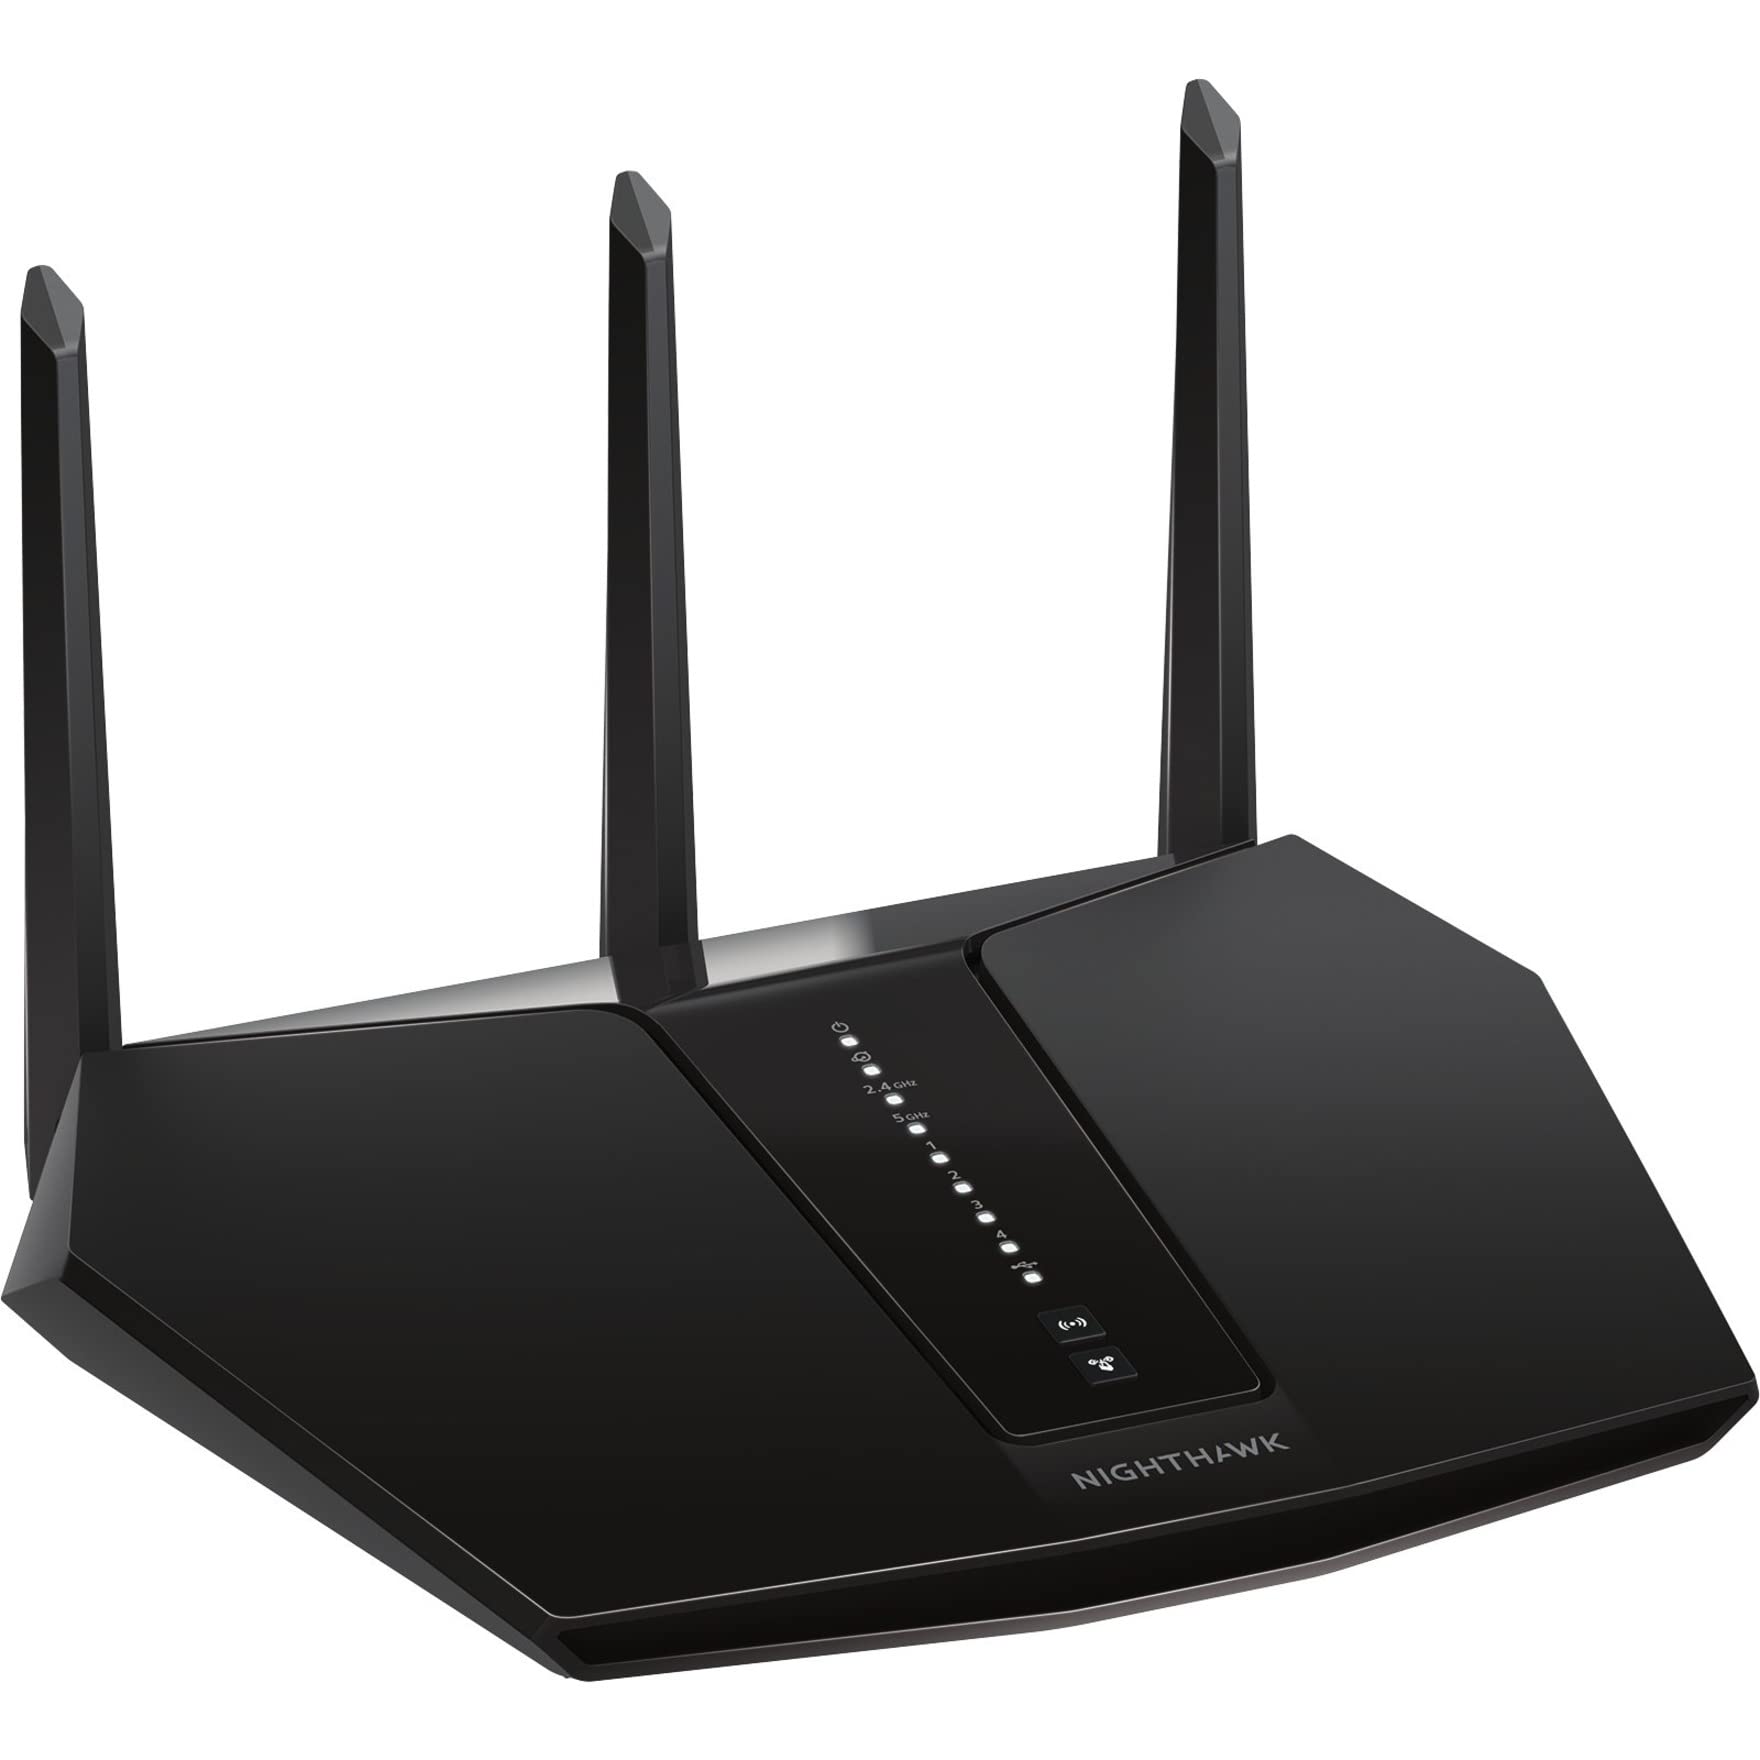 NETGEAR Nighthawk WiFi 6 Router (RAX30) 5-Stream Dual-Band Gigabit Router, AX2400 Wireless Speed (Up to 2.4 Gbps), Coverage Up to 2,000 sq.ft. and 20 Devices